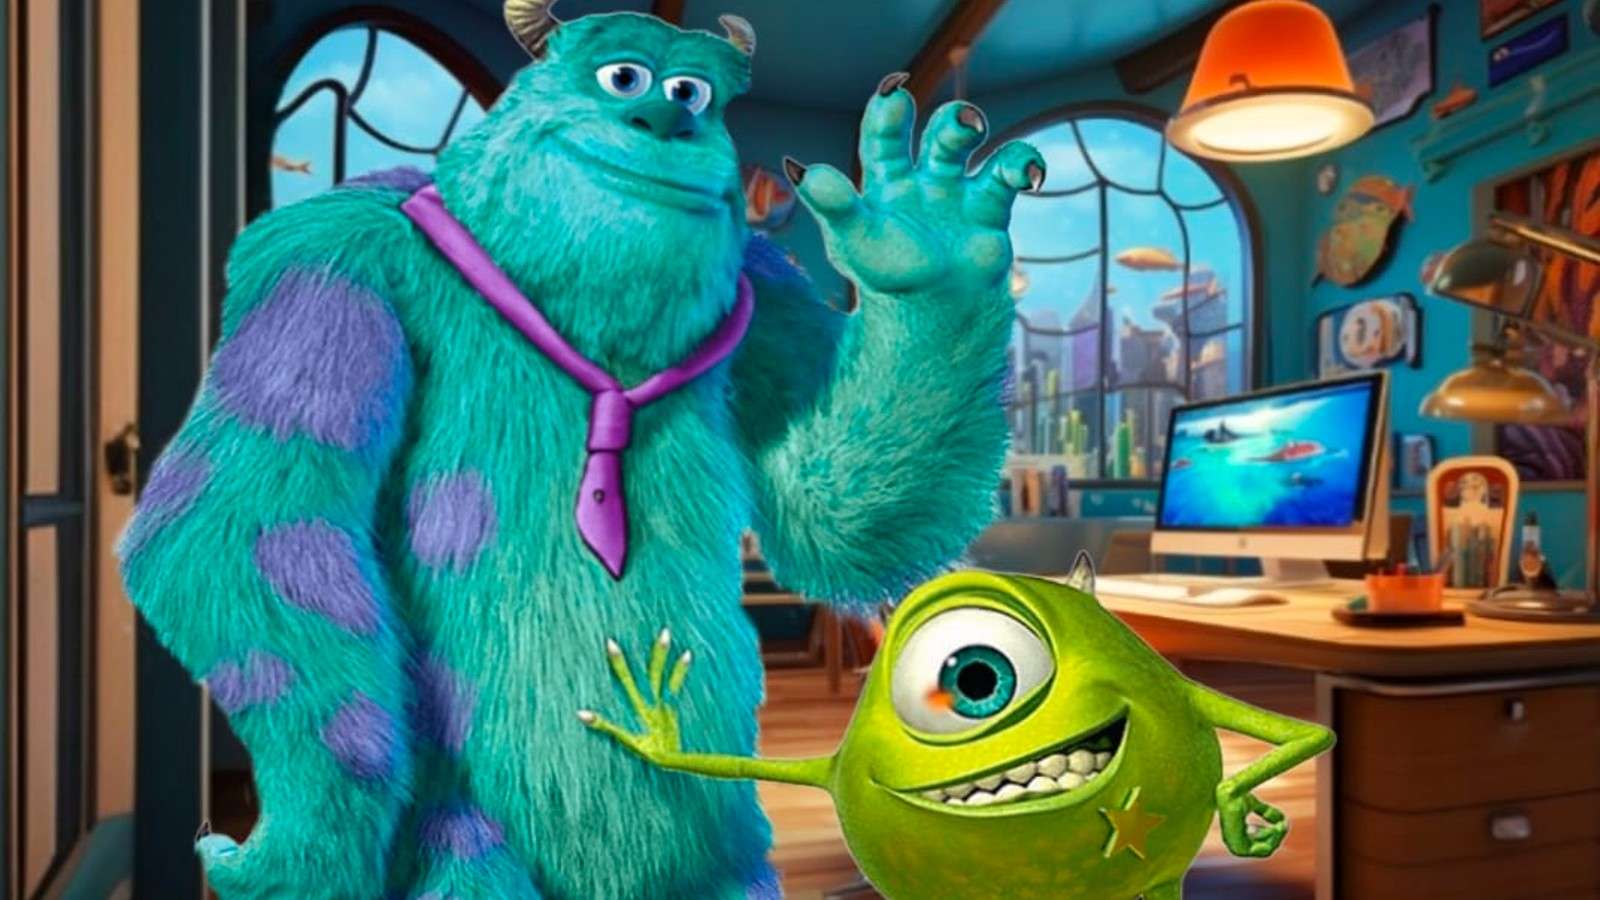 Mike and Sully on the fake poster for Monsters Inc: Laugh Academy